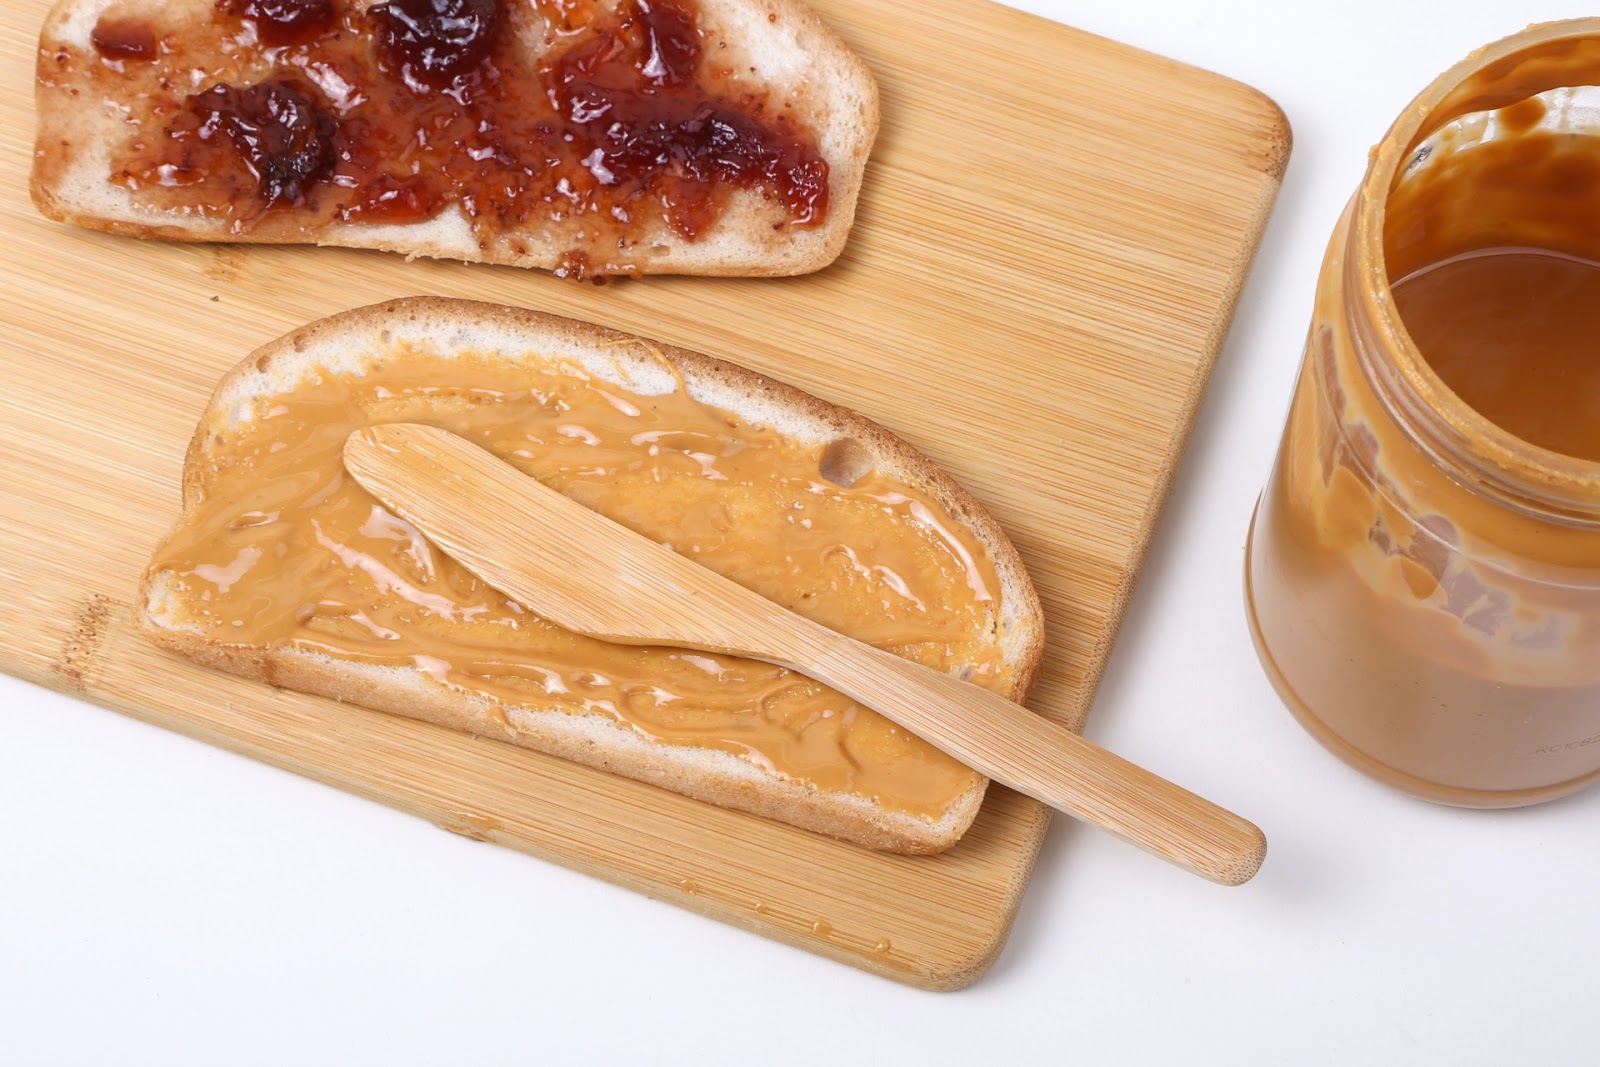 Two bread slices, one with jam and one with peanut butter - breakfast ideas without eggs